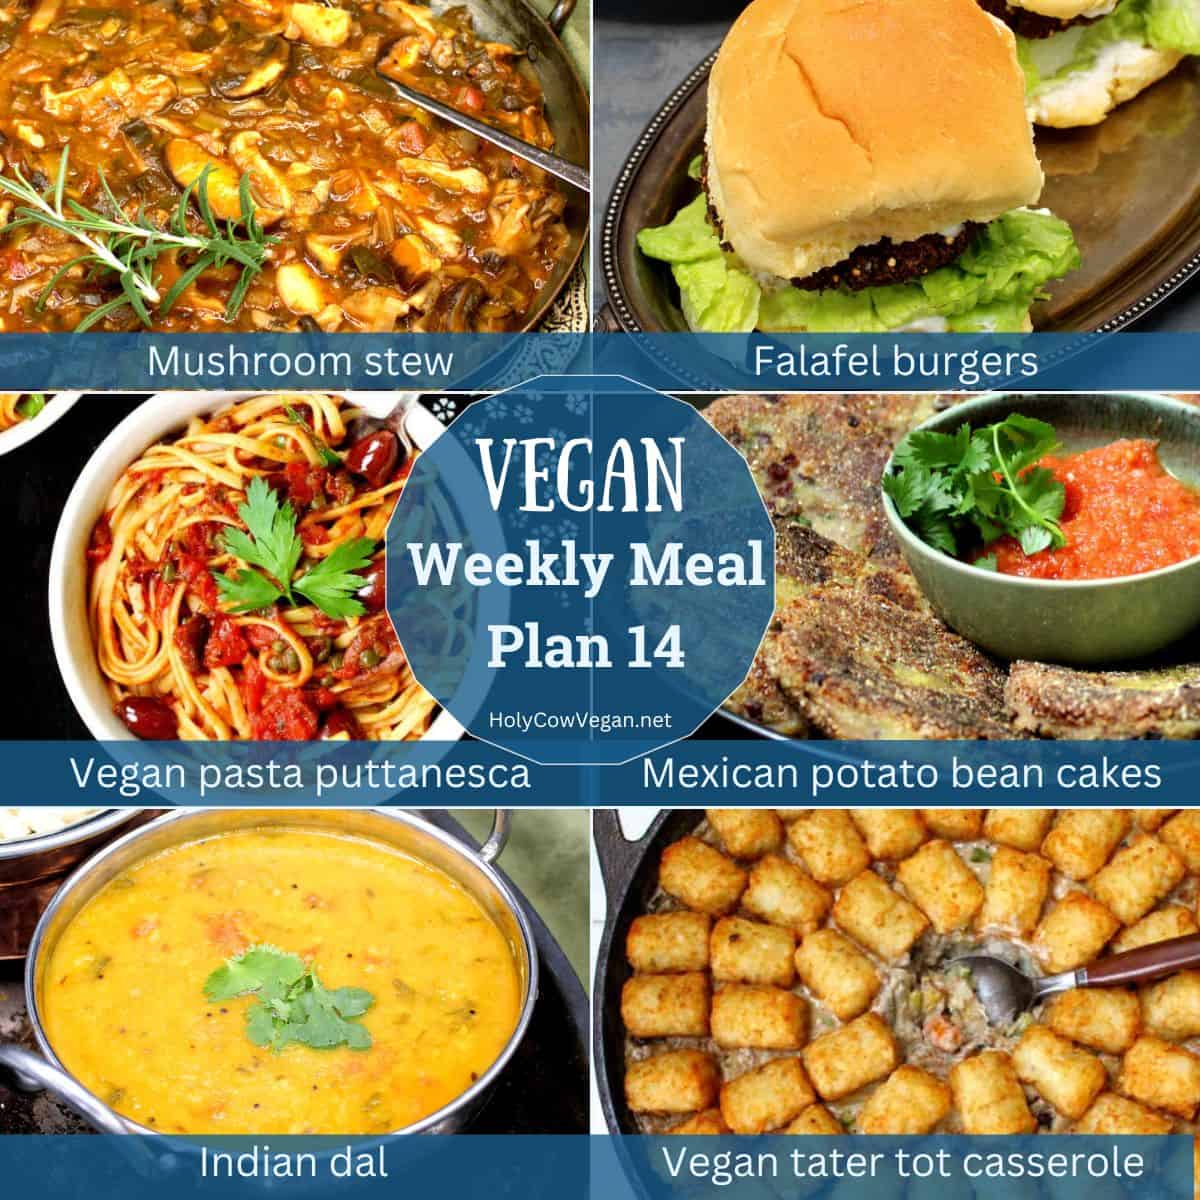 Images of six vegan dinners with text that says "vegan meal plan 14".